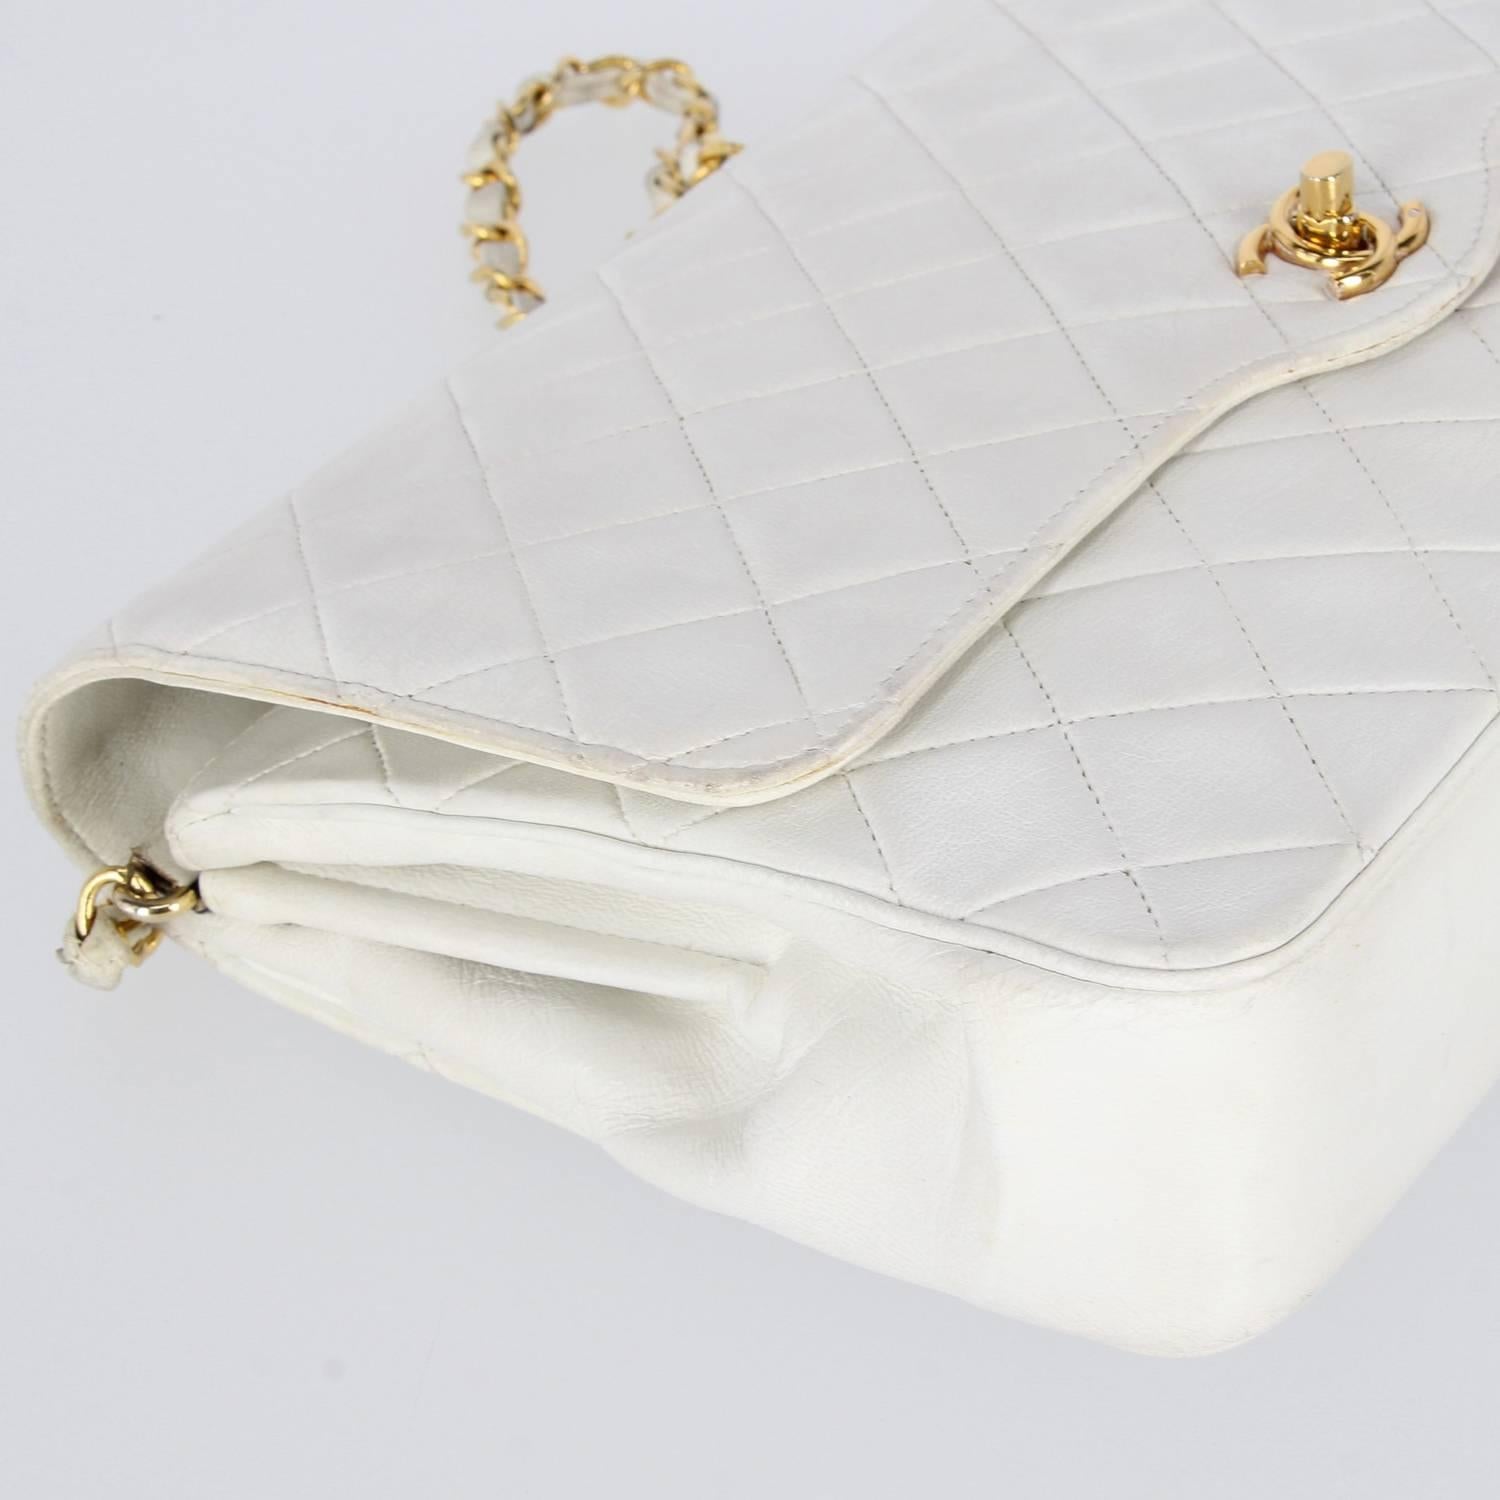 Women's Chanel White Leather Vintage Bag, 1980s